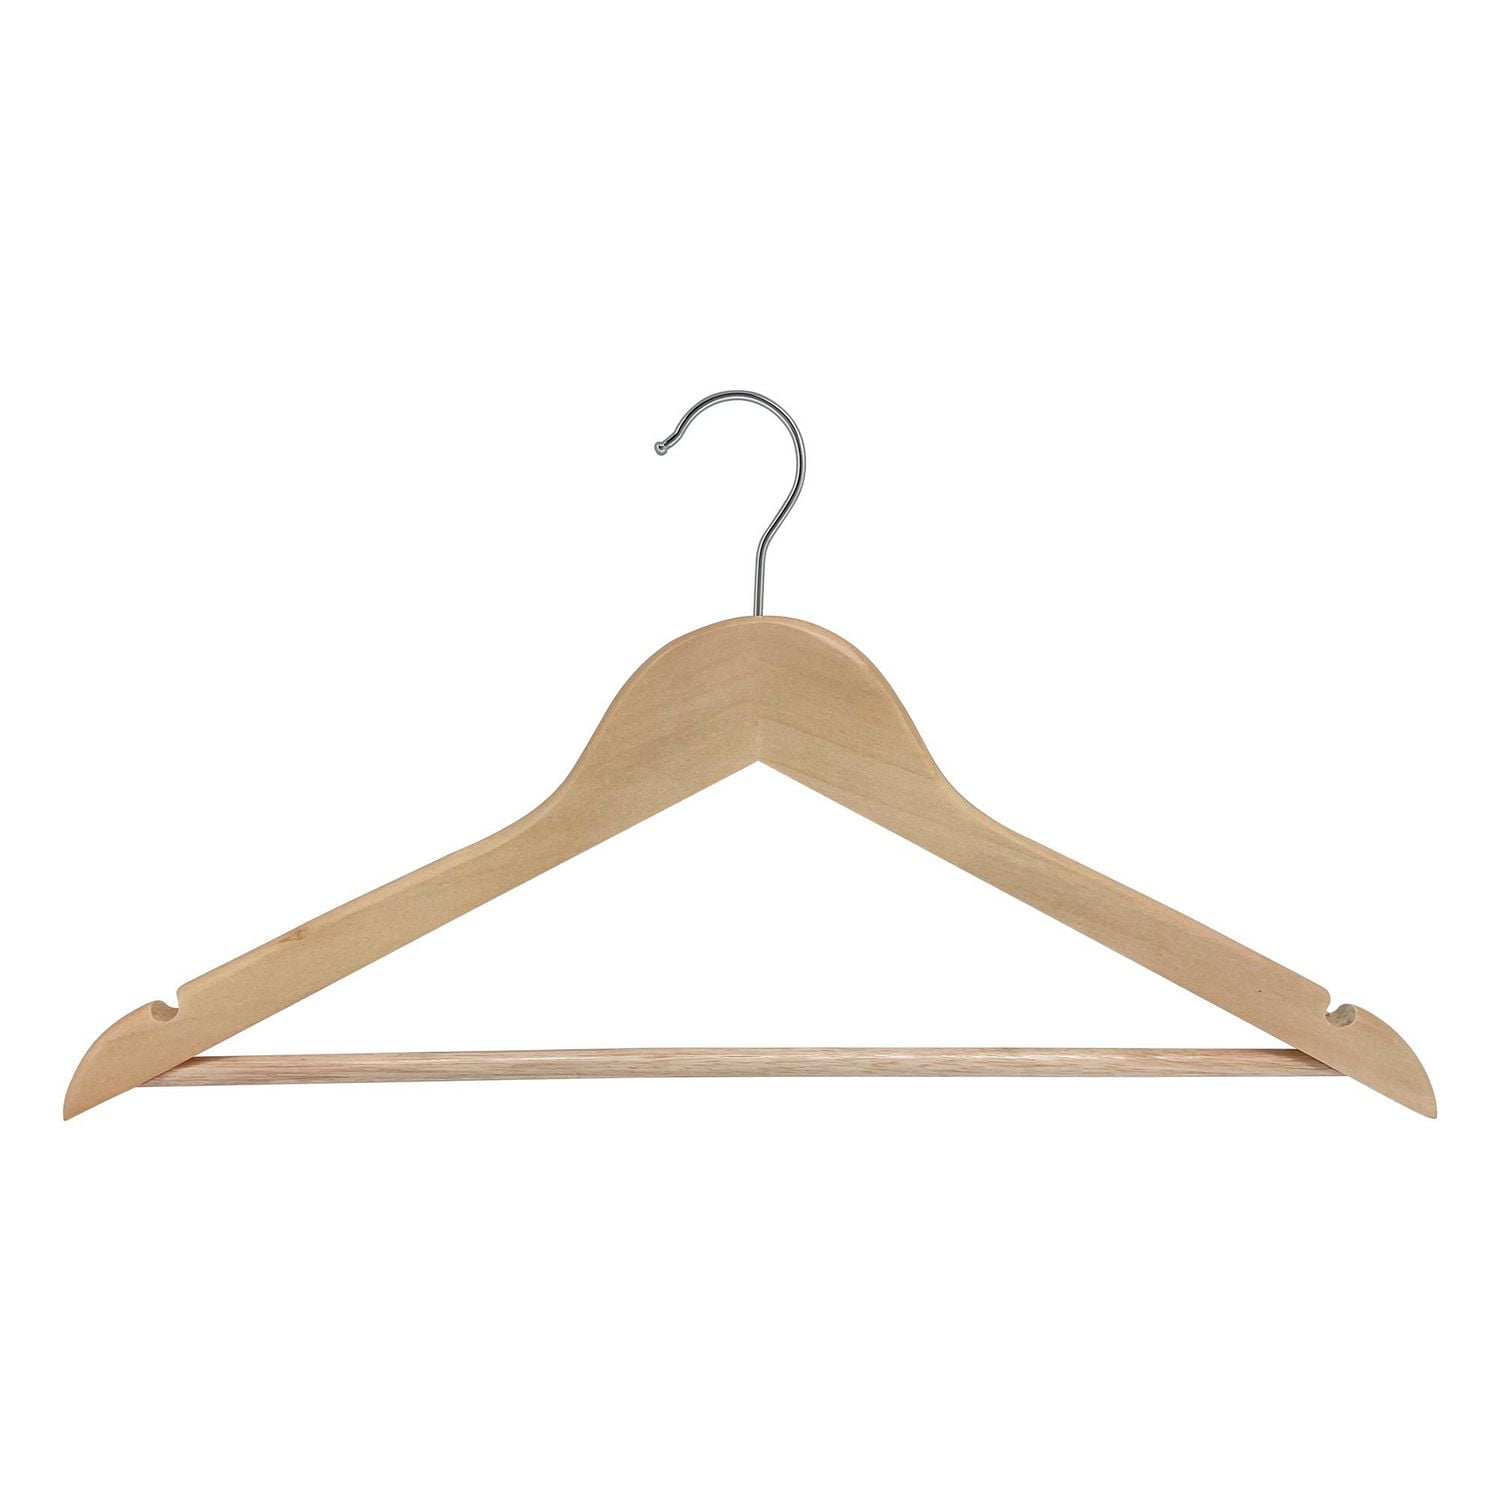 20 Pack Home Premium Wooden Hangers - Slightly Curved Hanger Set - Solid Wood  Coat Hangers with Stylish Chrome Hooks - Heavy-Duty Clothes, Jacket, Shirt,  Pants, Suit Hangers (Natural), 20 PACK NATURAL